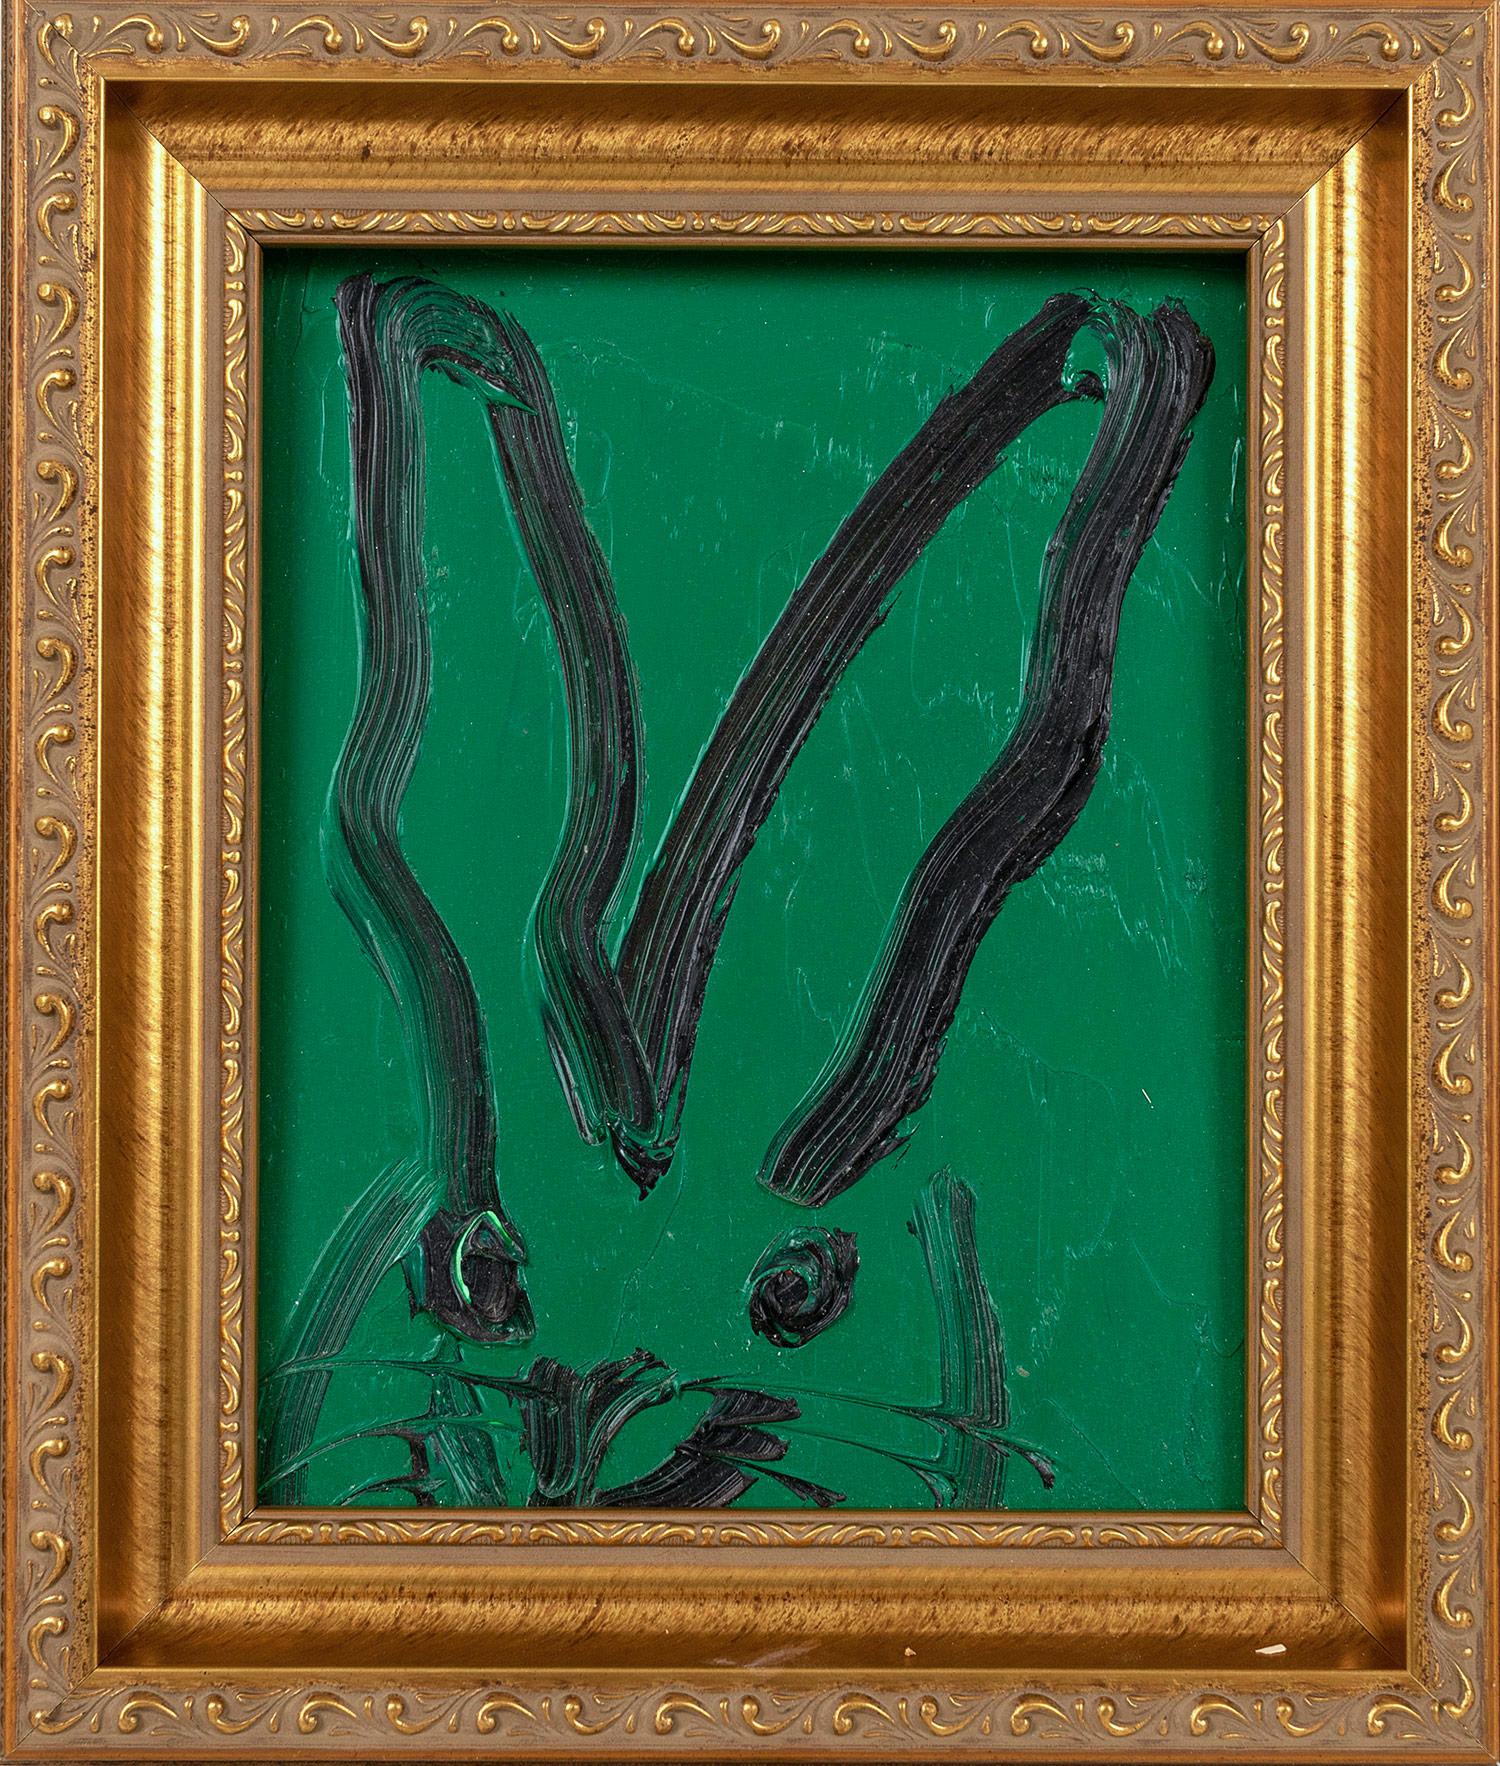 Hunt Slonem Abstract Painting - "Untitled" (Bunny on Green Background) Oil Painting on Wood Panel